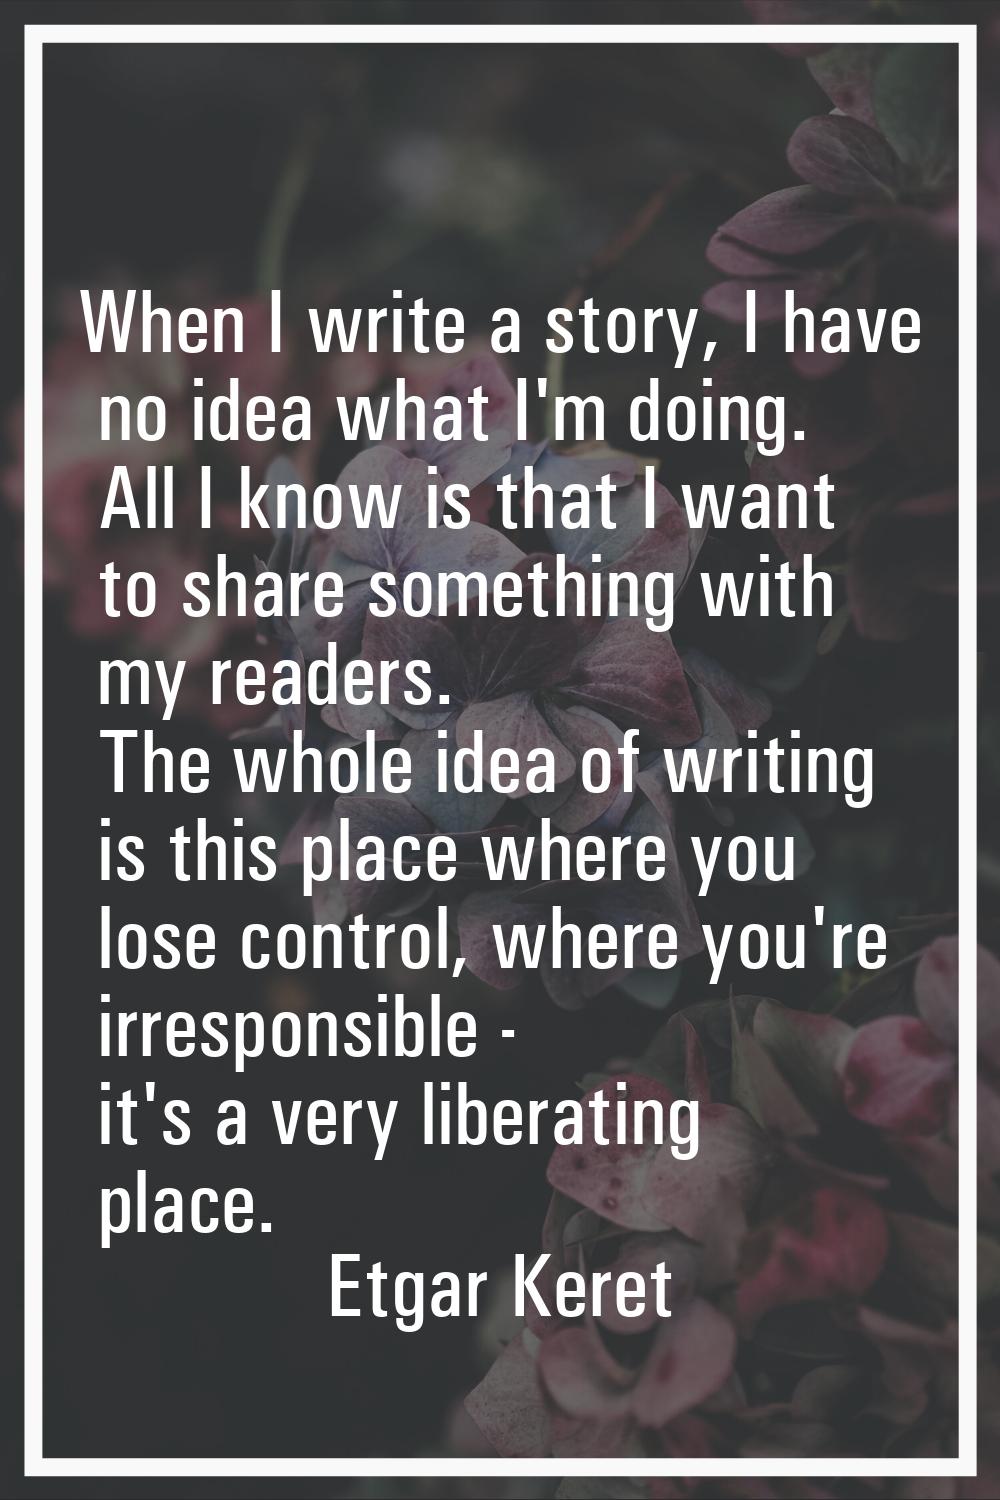 When I write a story, I have no idea what I'm doing. All I know is that I want to share something w